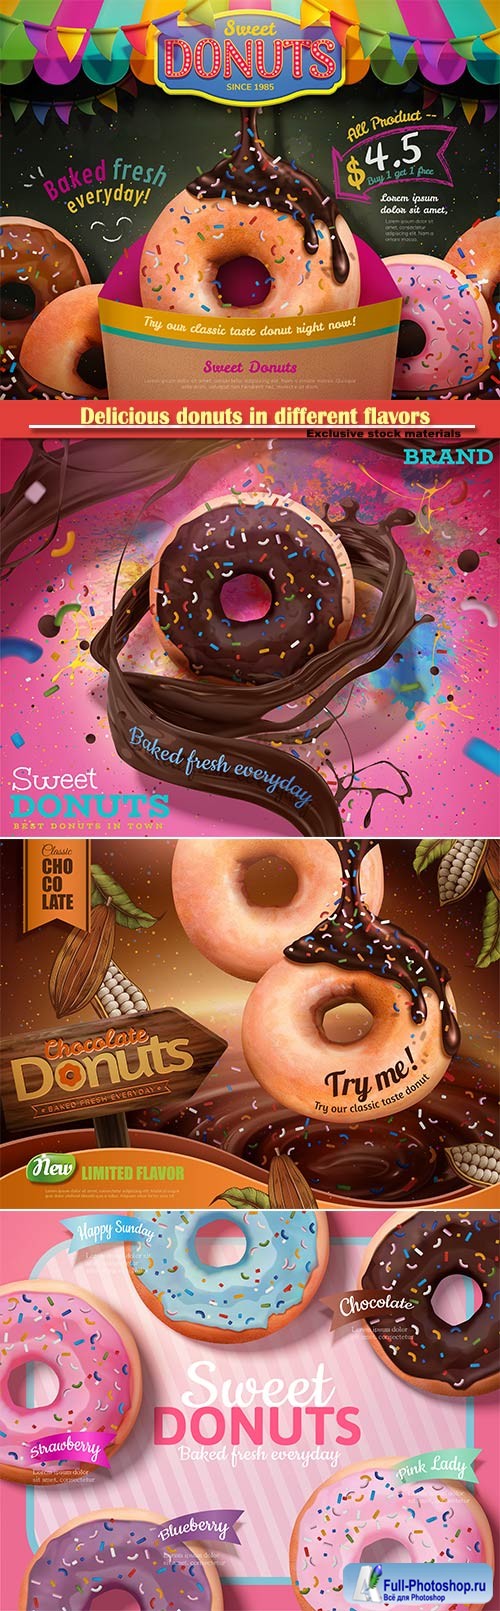 Delicious donuts in different flavors in 3d vector illustration